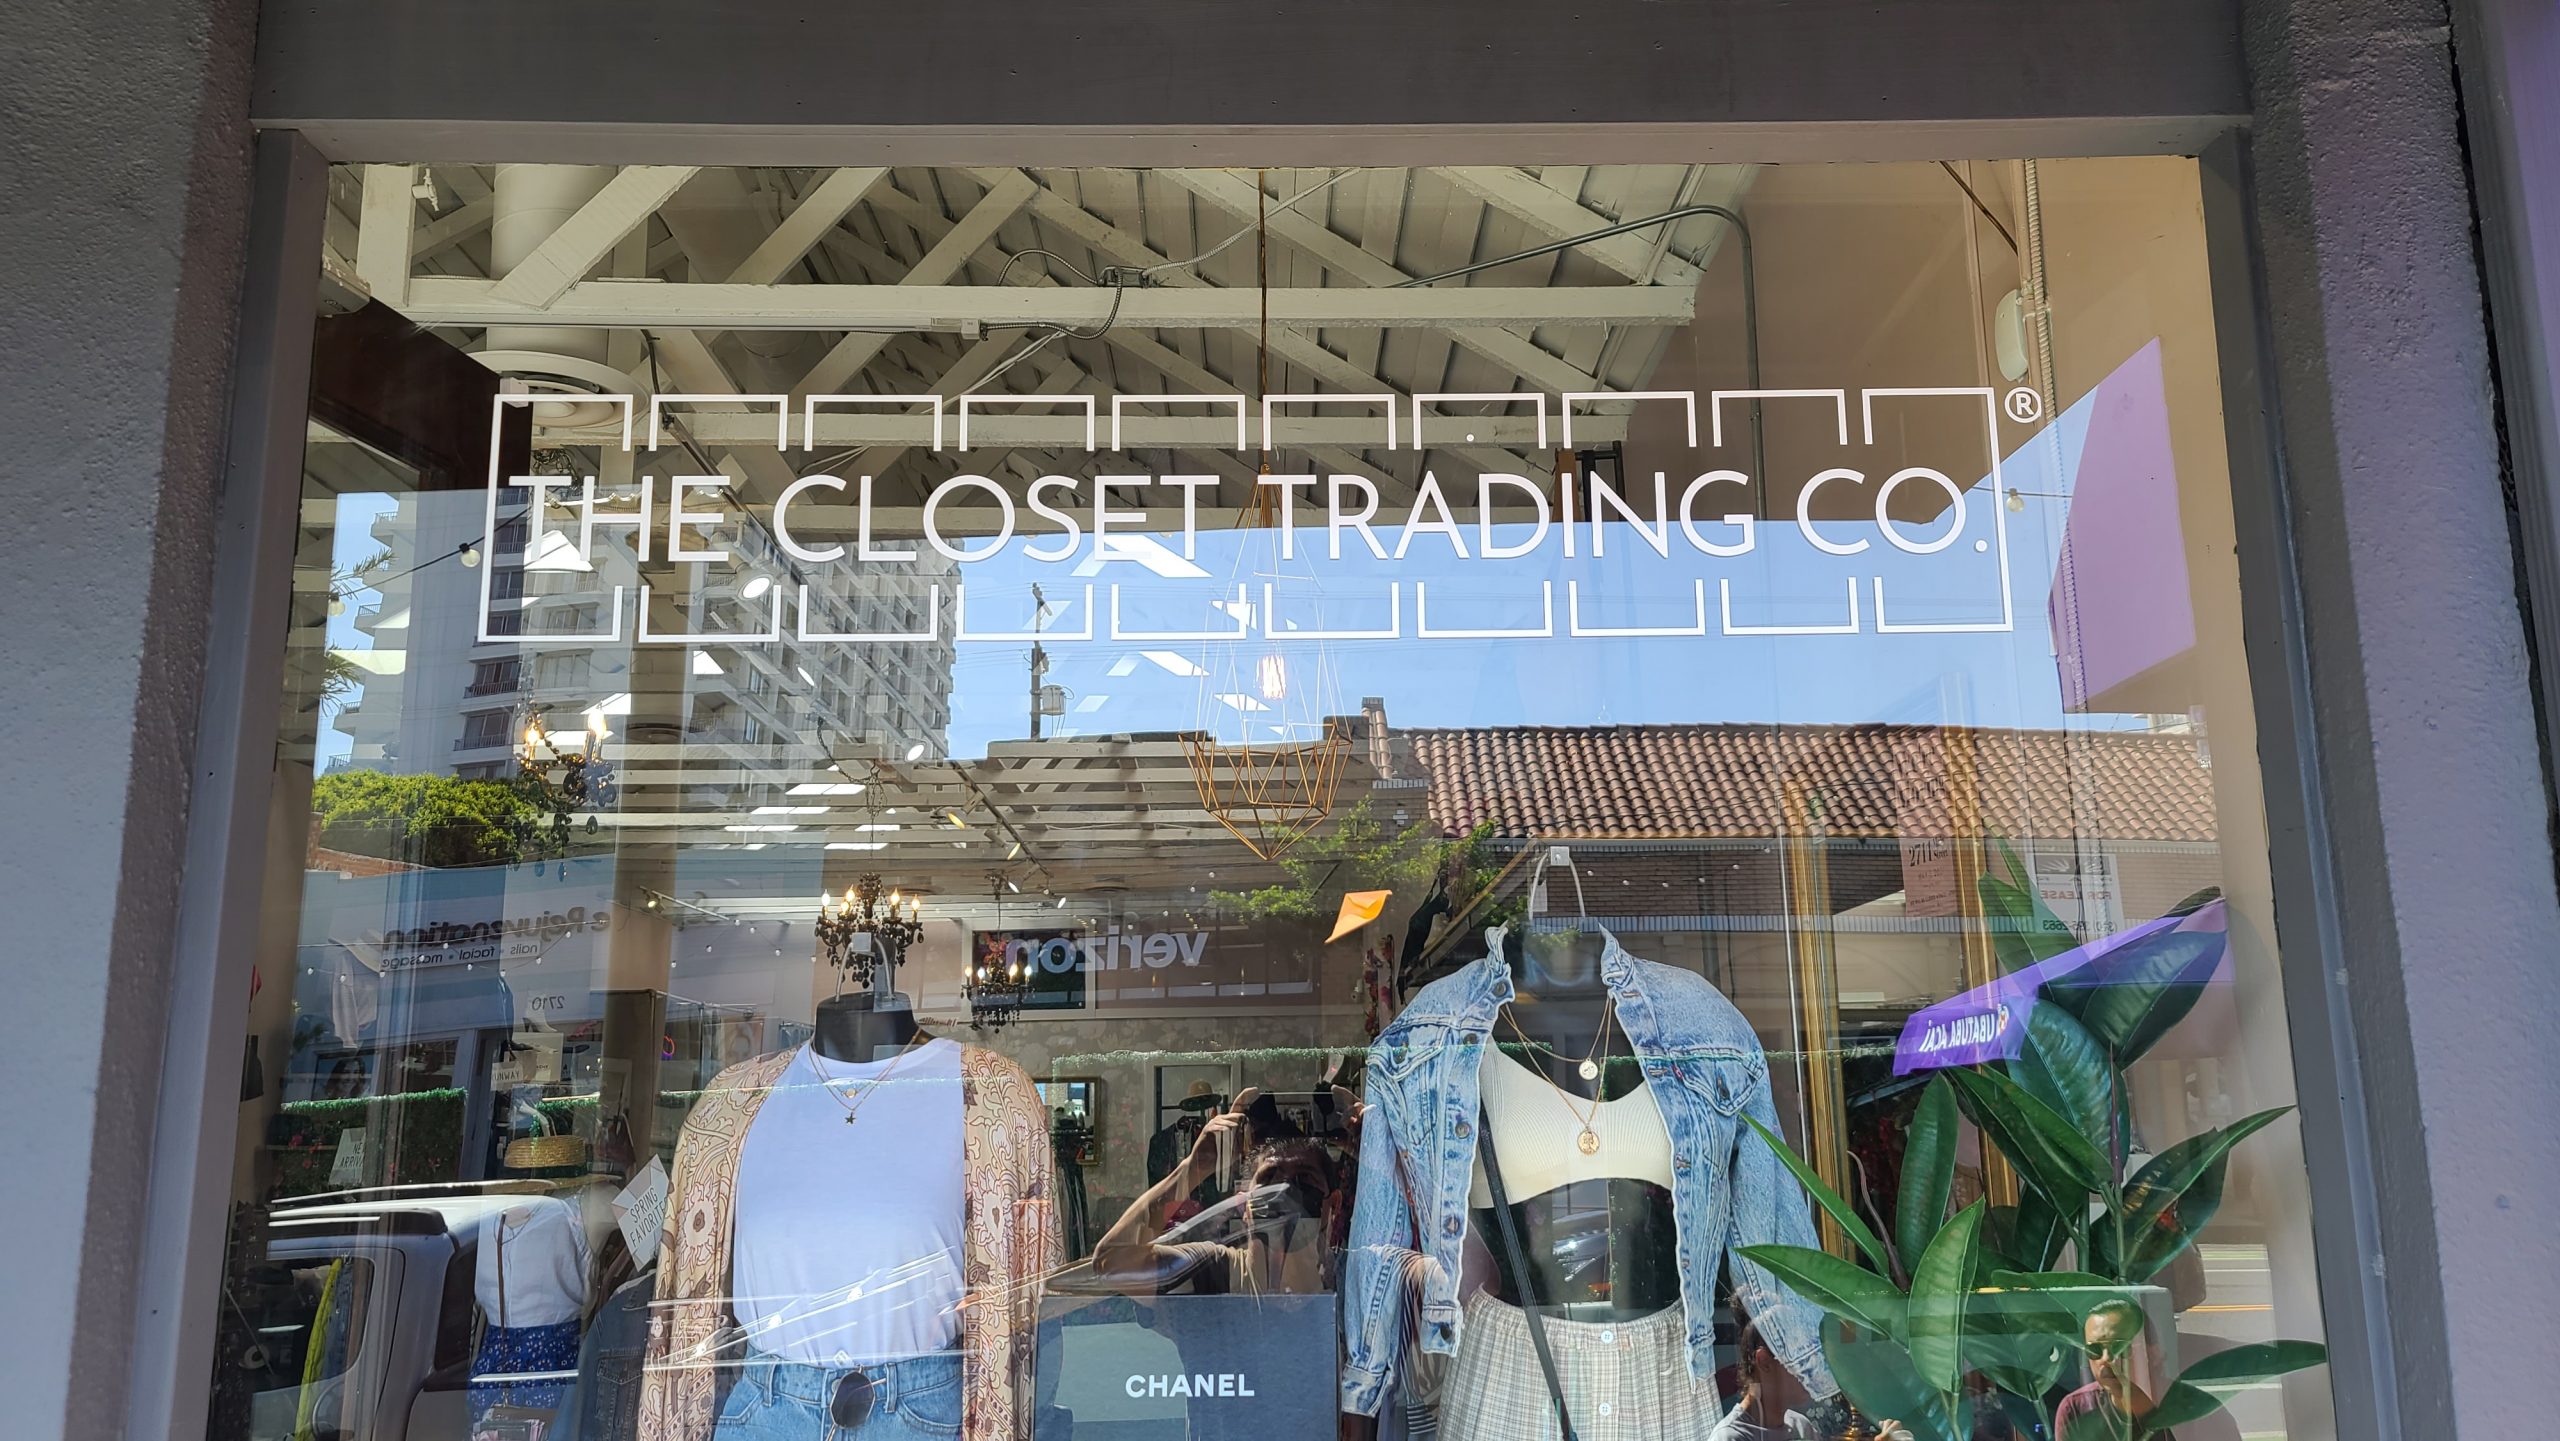 With the boutique window graphics package we installed for The Closet Trading Company, their Santa Monica storefront will be even more eye-catching.